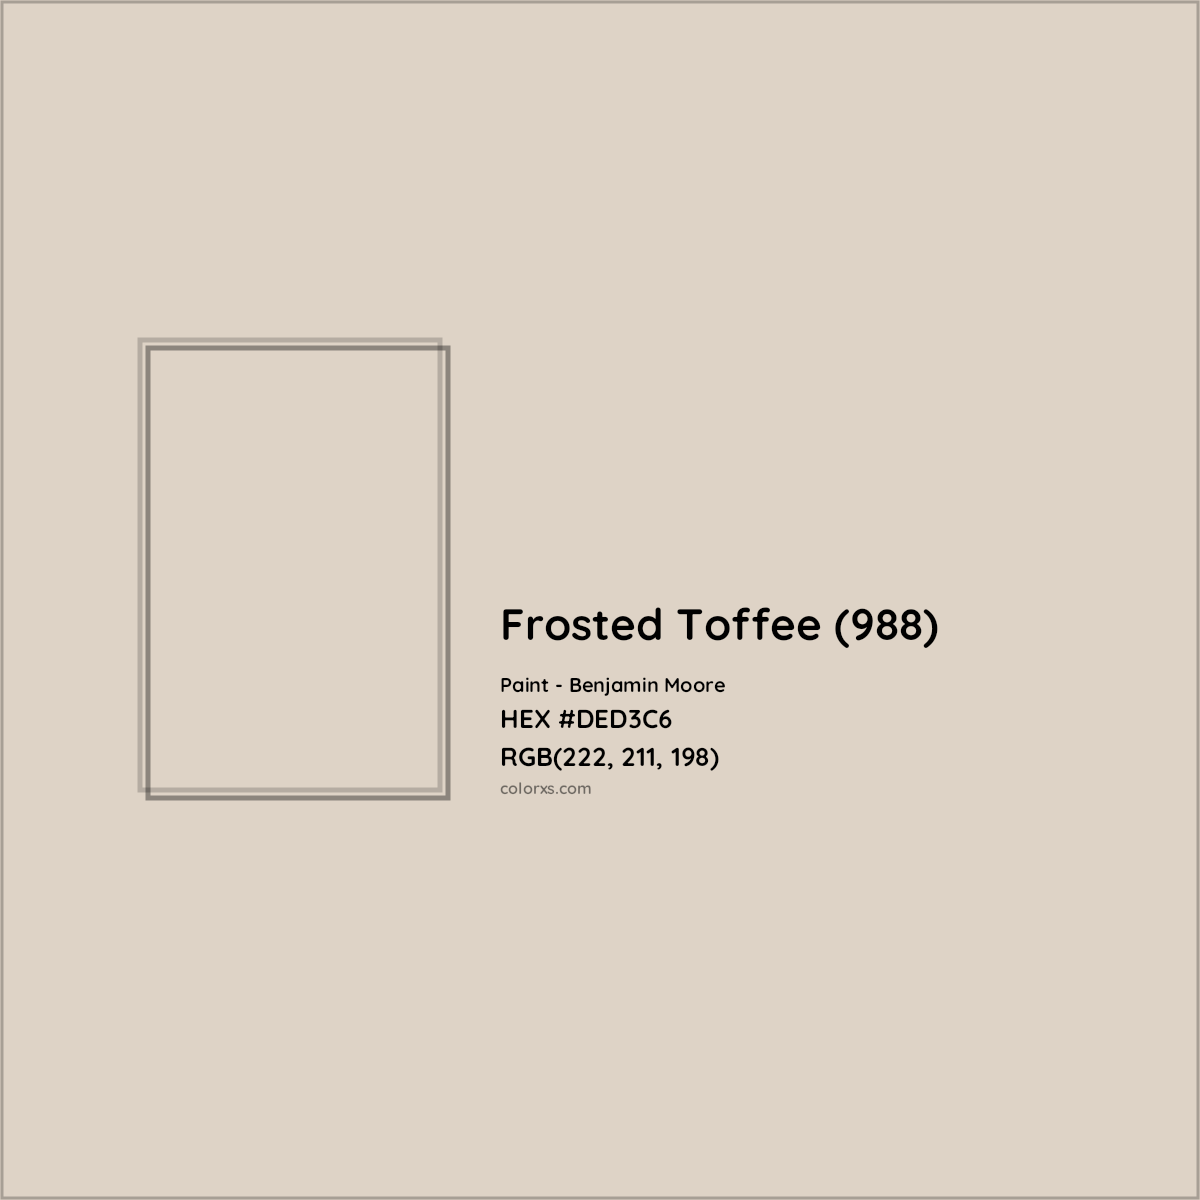 HEX #DED3C6 Frosted Toffee (988) Paint Benjamin Moore - Color Code